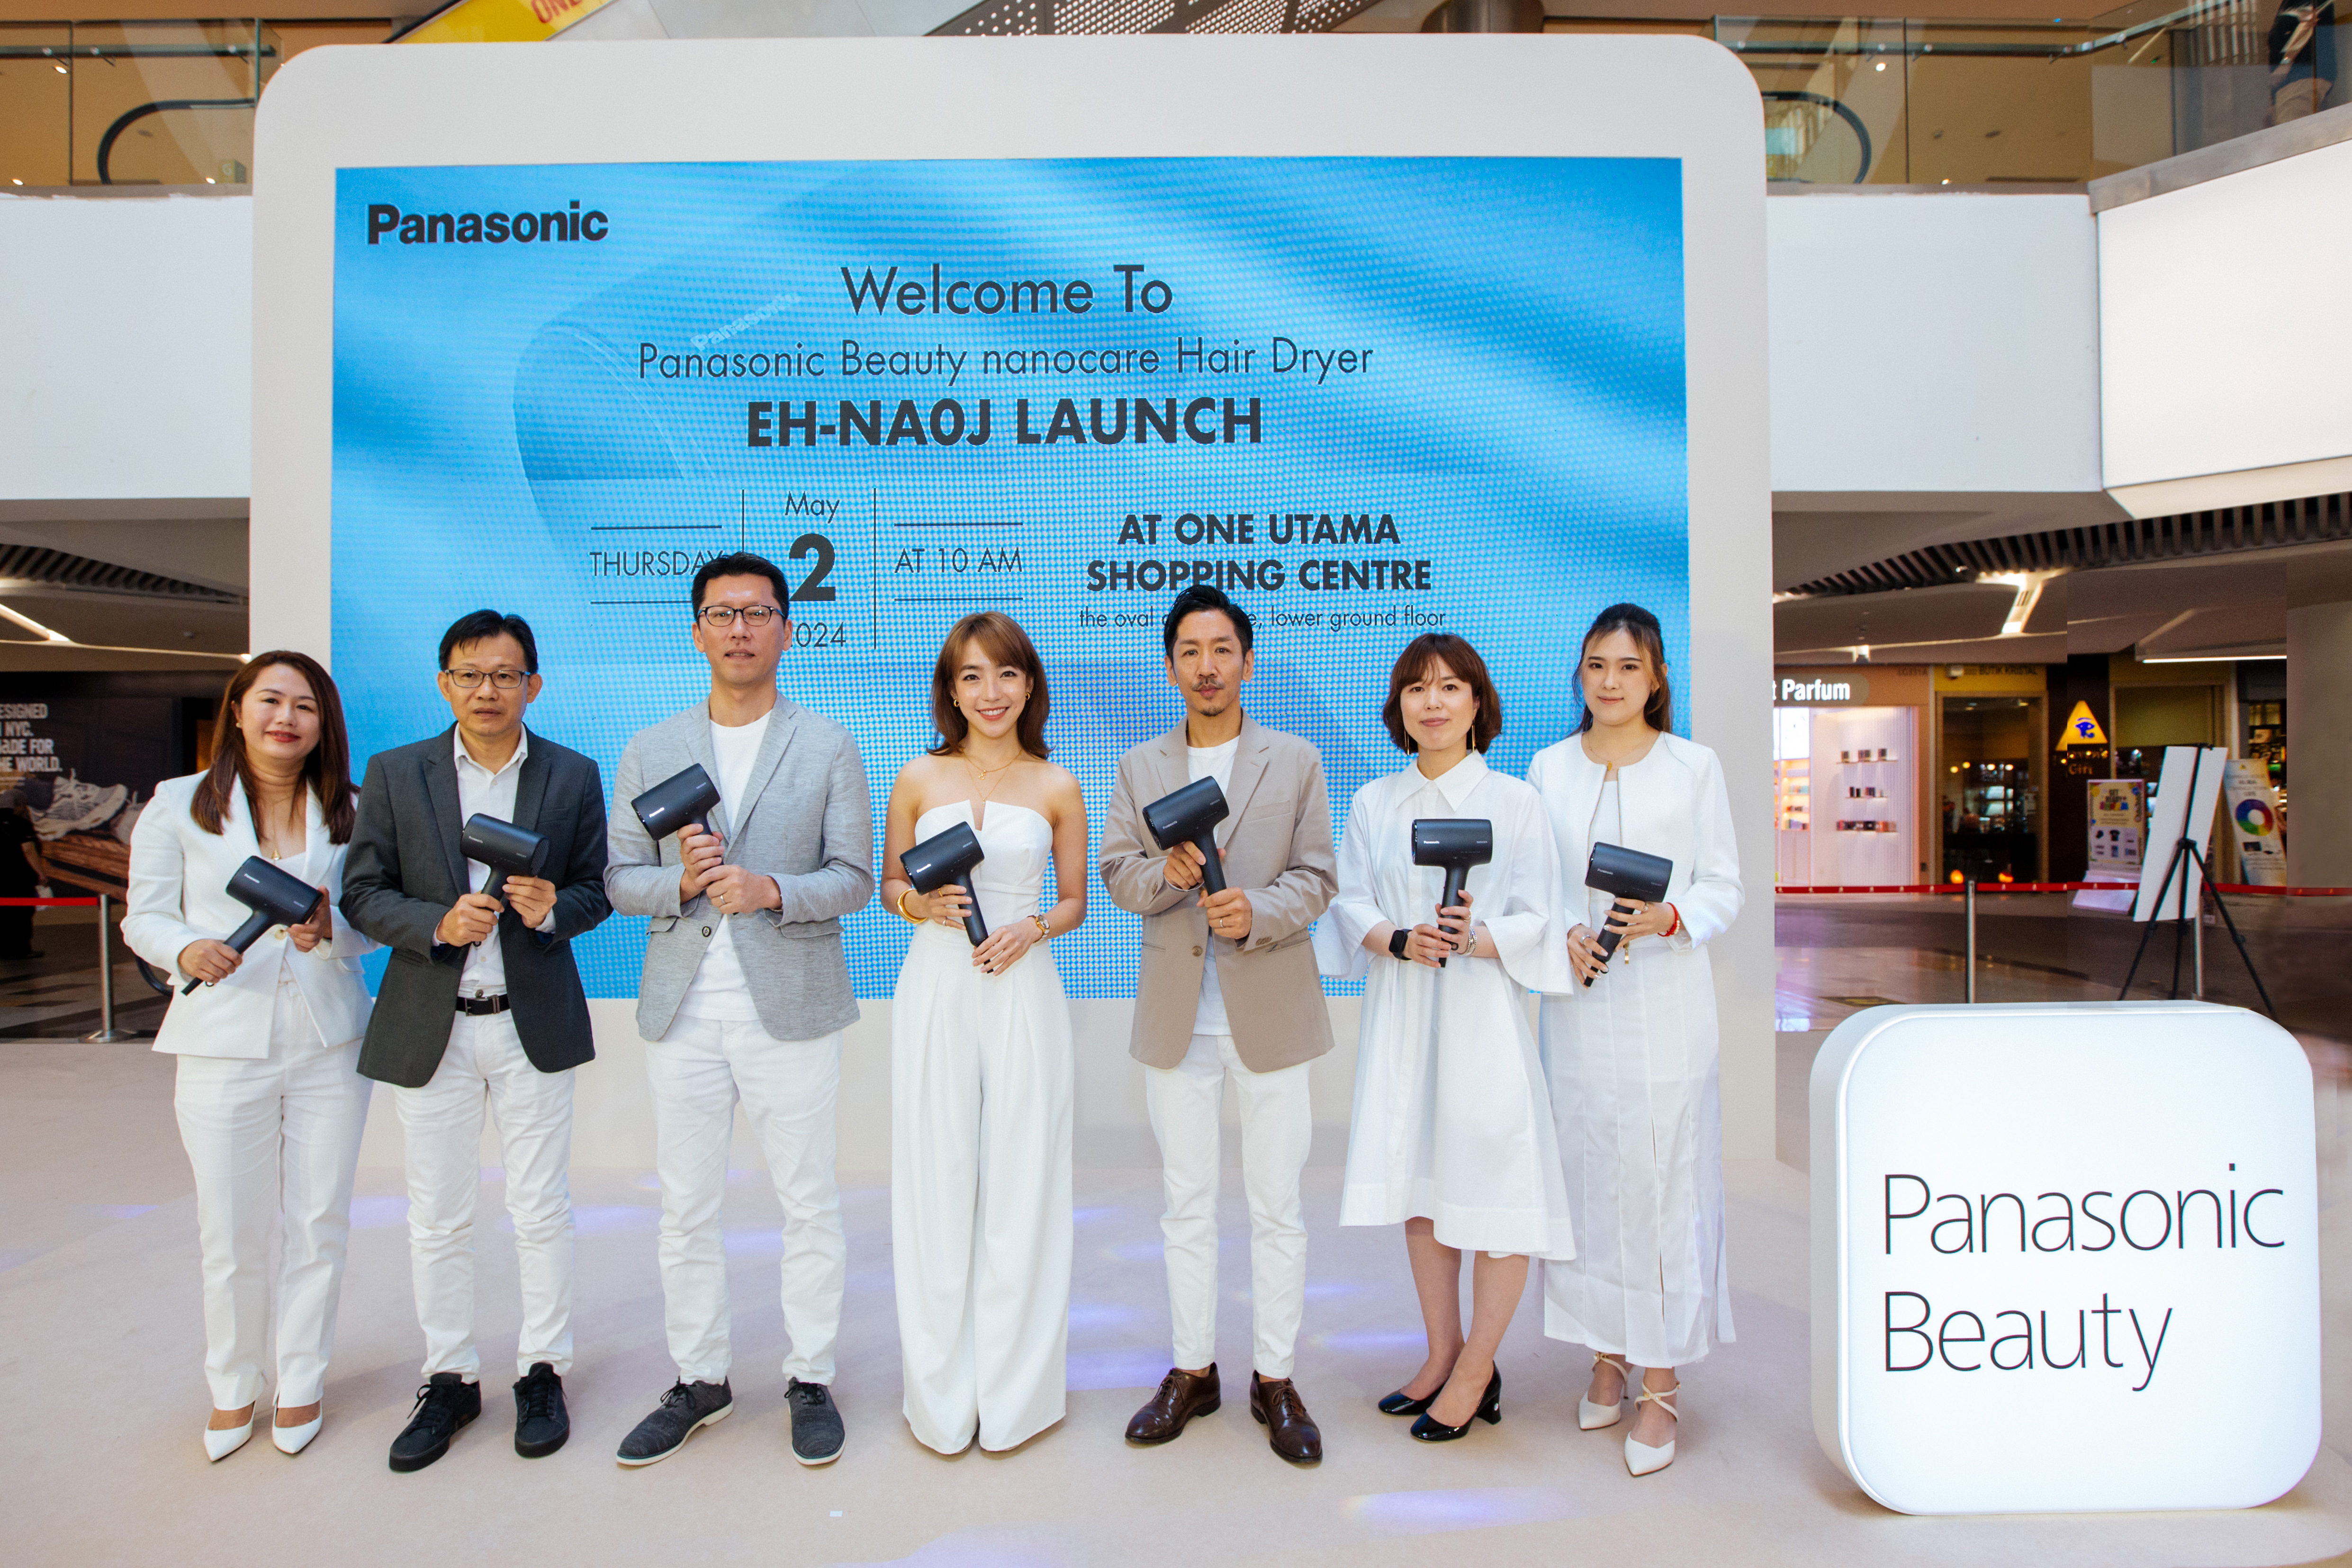 Panasonic Beauty Refines Its Approach, Emphasizing Natural Beauty Through Innovative Technology with the Launch of the nanocare Hair Dryer EH-NA0J